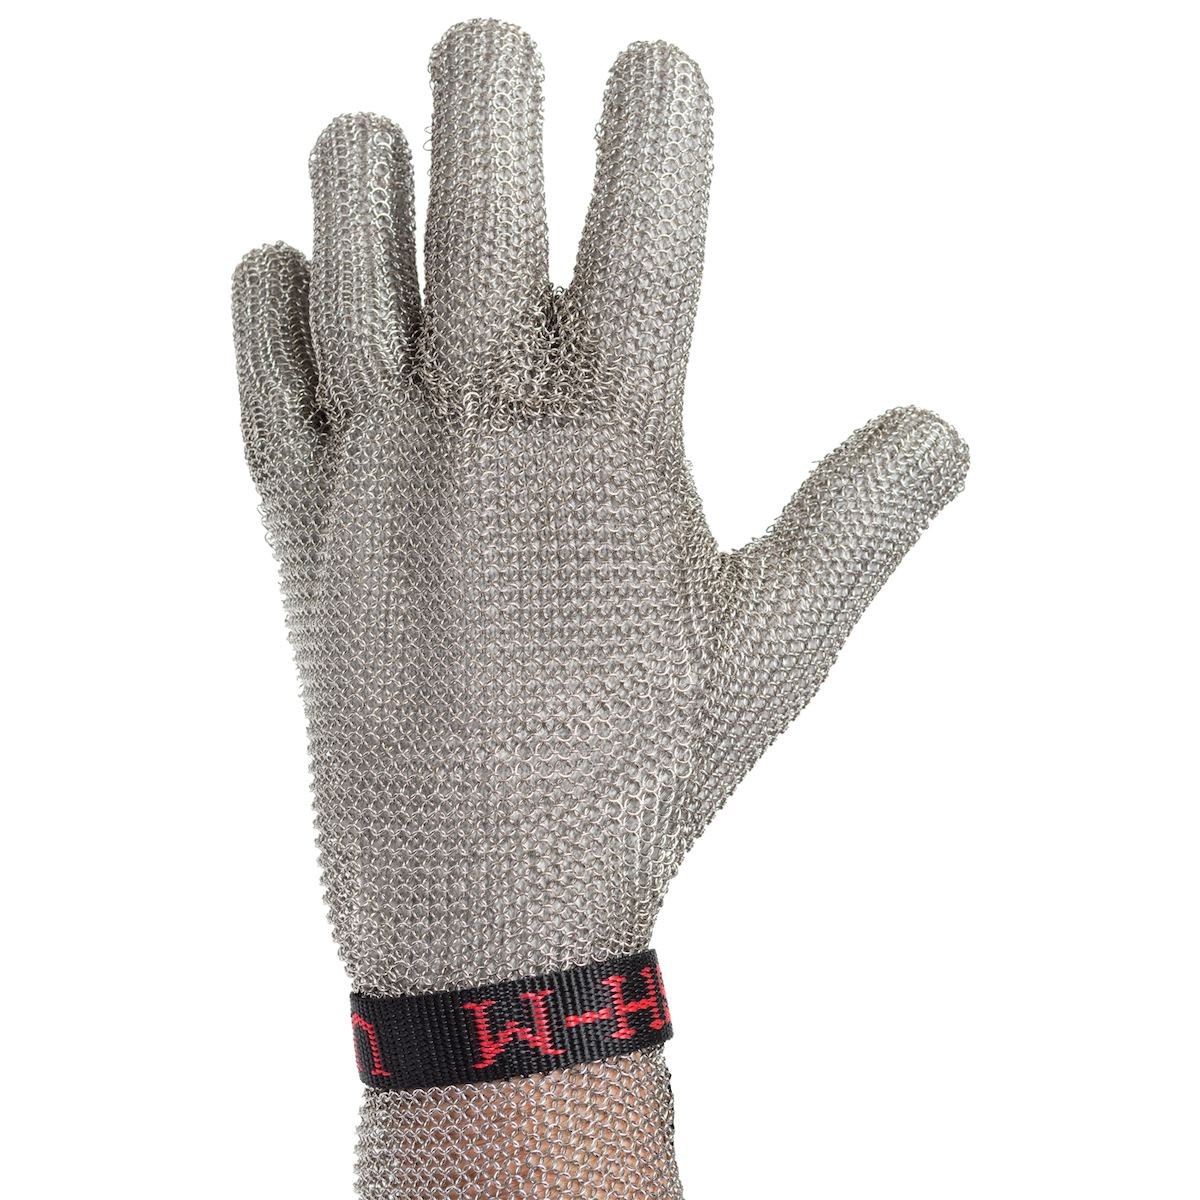 USM-1350 US Mesh® Stainless Steel Mesh Glove with Reinforced Finger Crotch and Adjustable Straps - Forearm Length